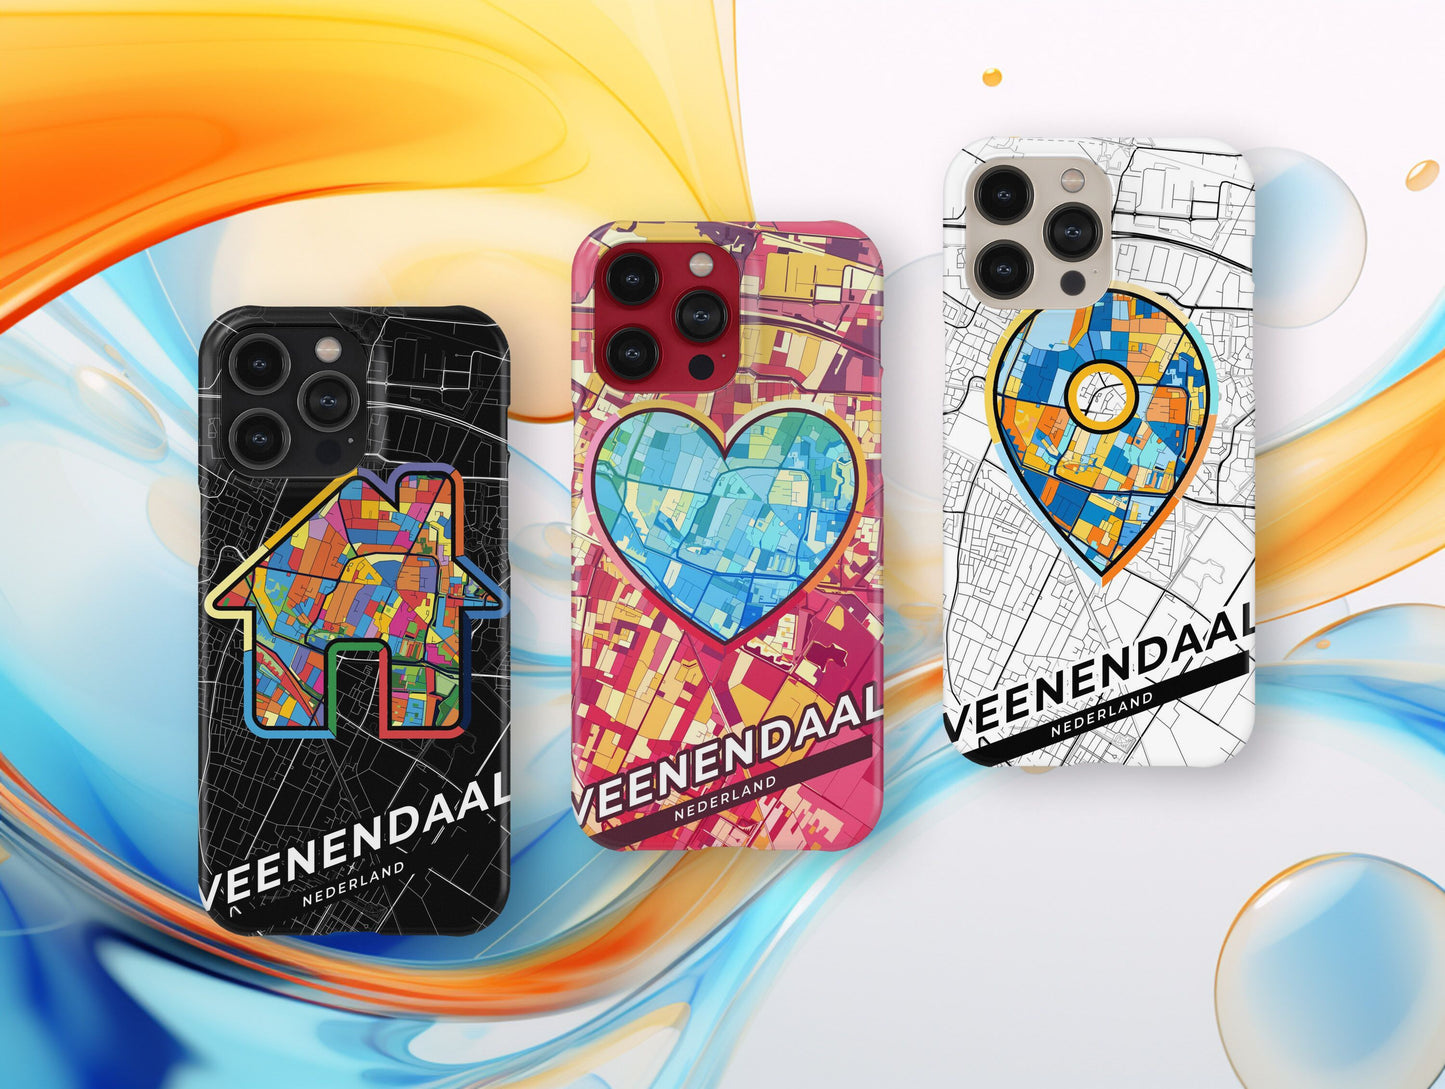 Veenendaal Netherlands slim phone case with colorful icon